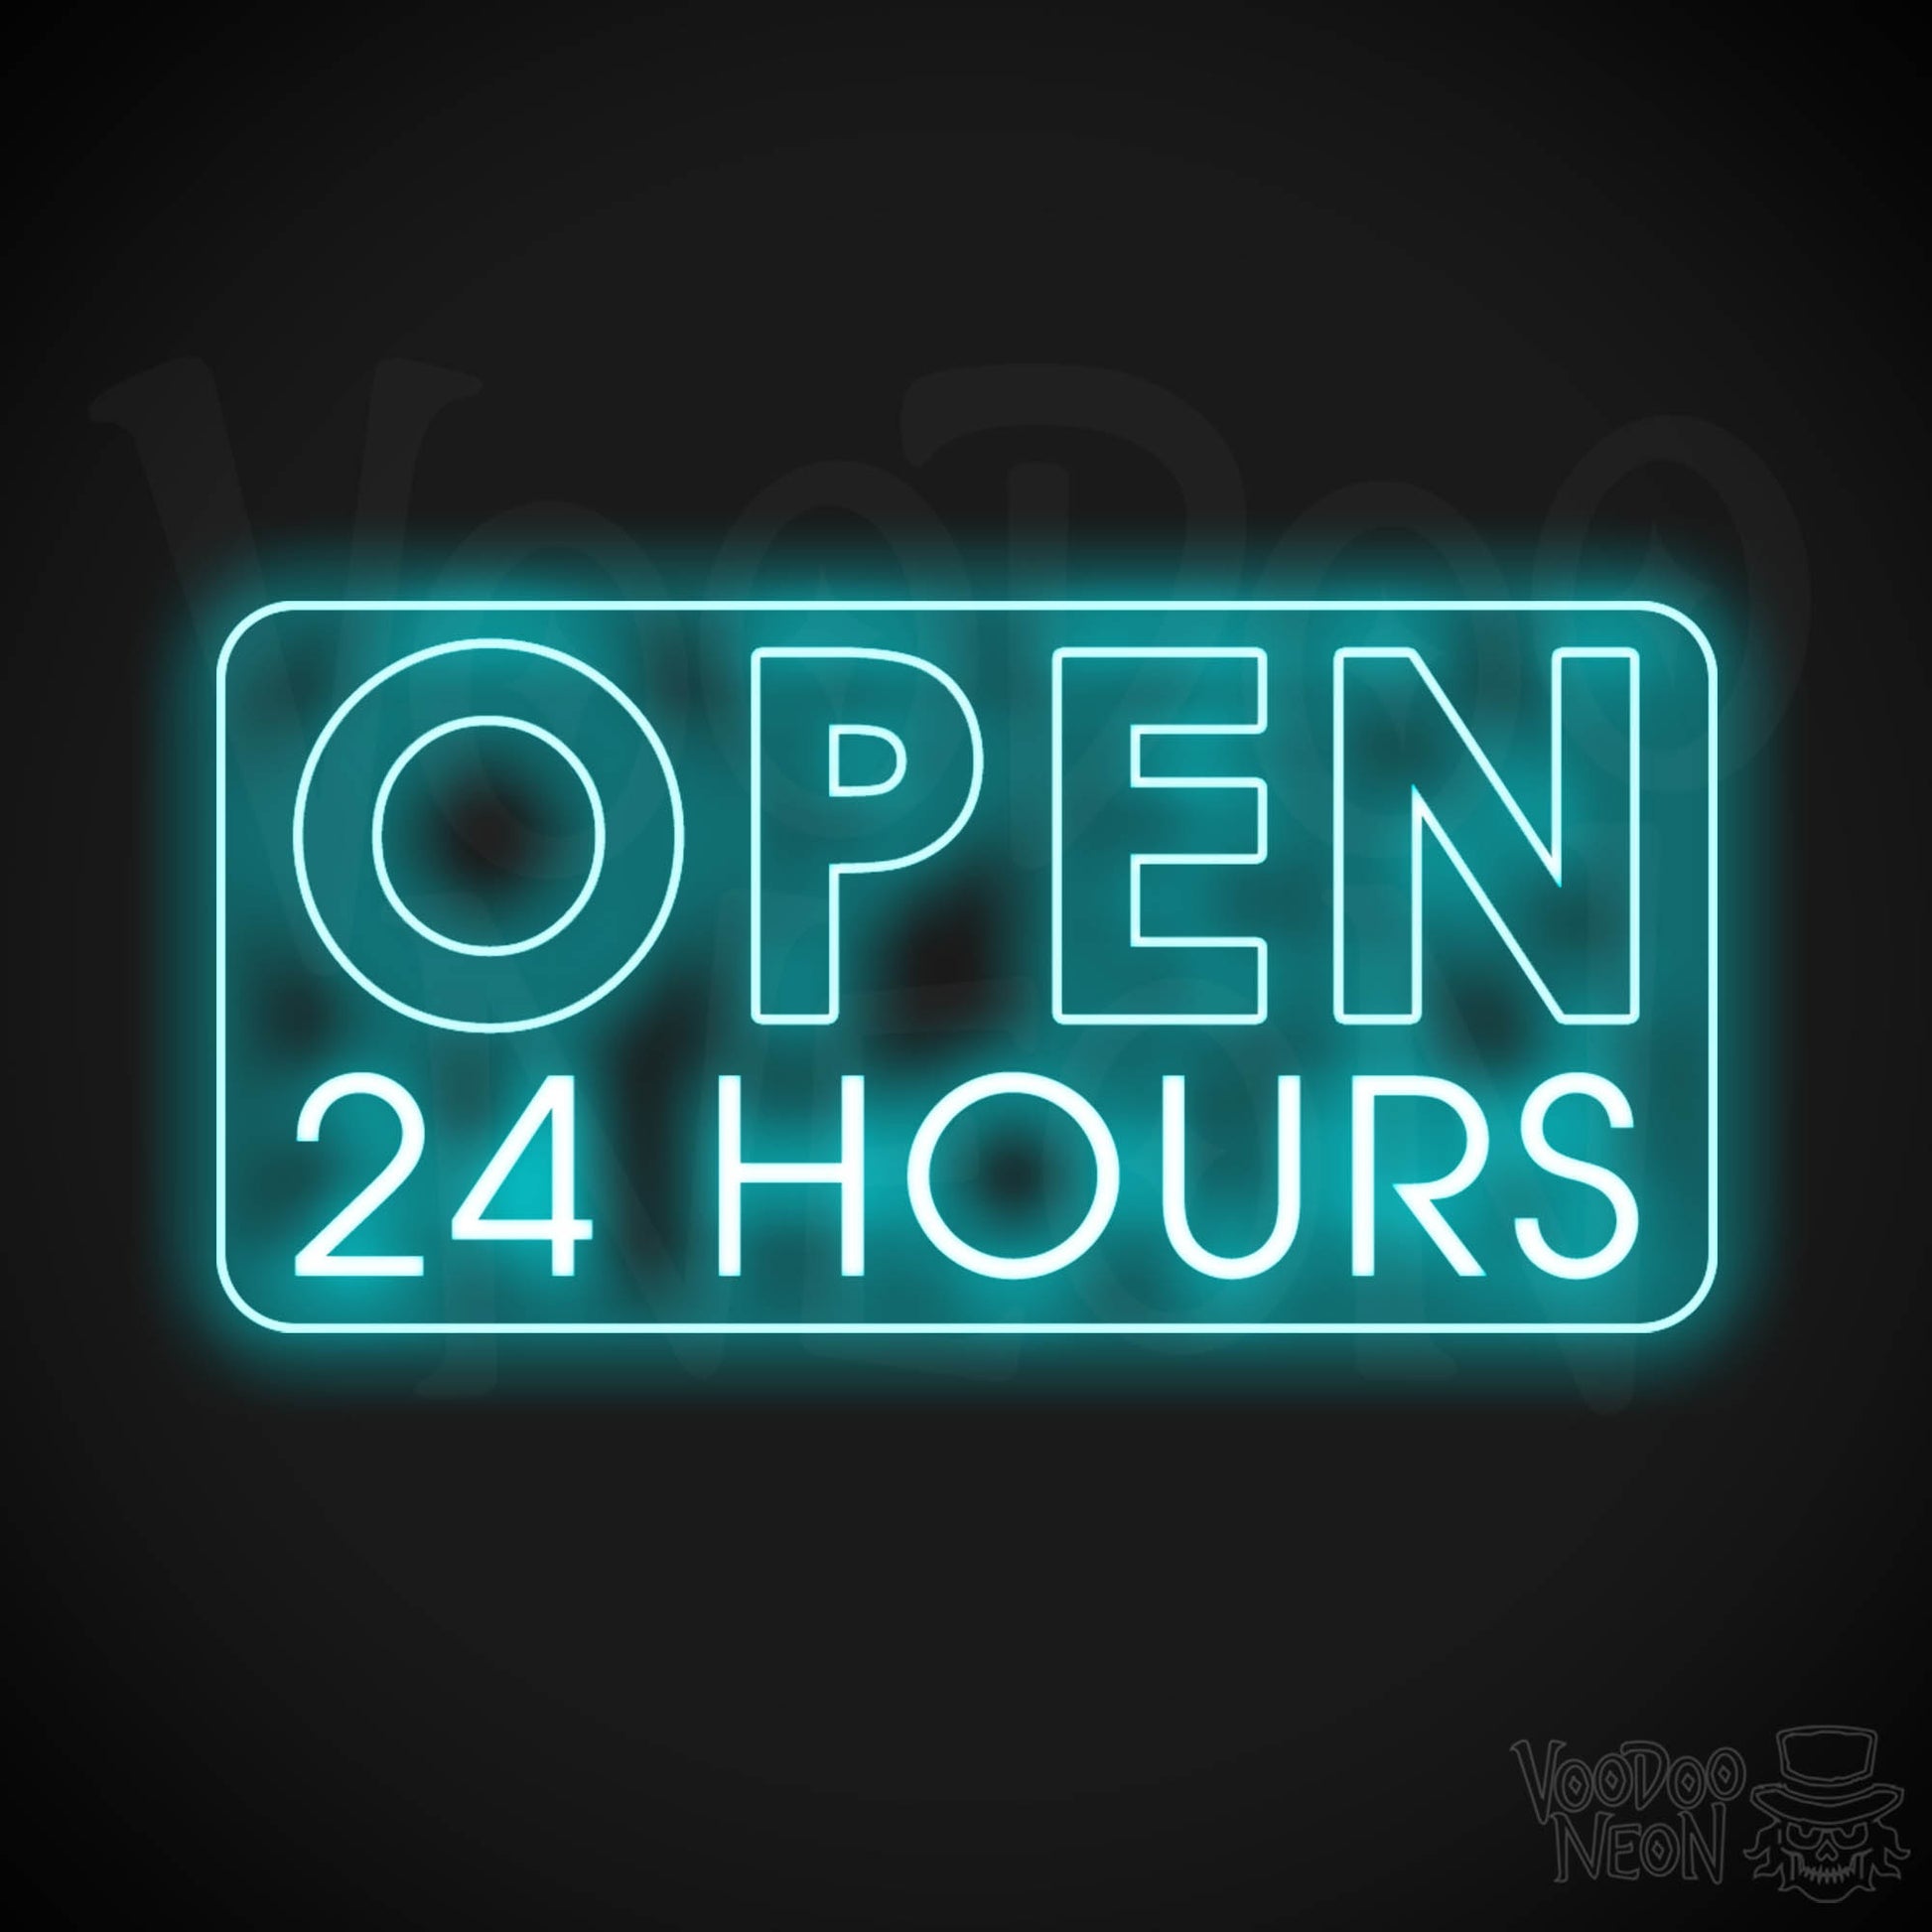 Open 24 Hours Neon Sign - Neon Open 24 Hours Sign - Shop Signs - Color Ice Blue